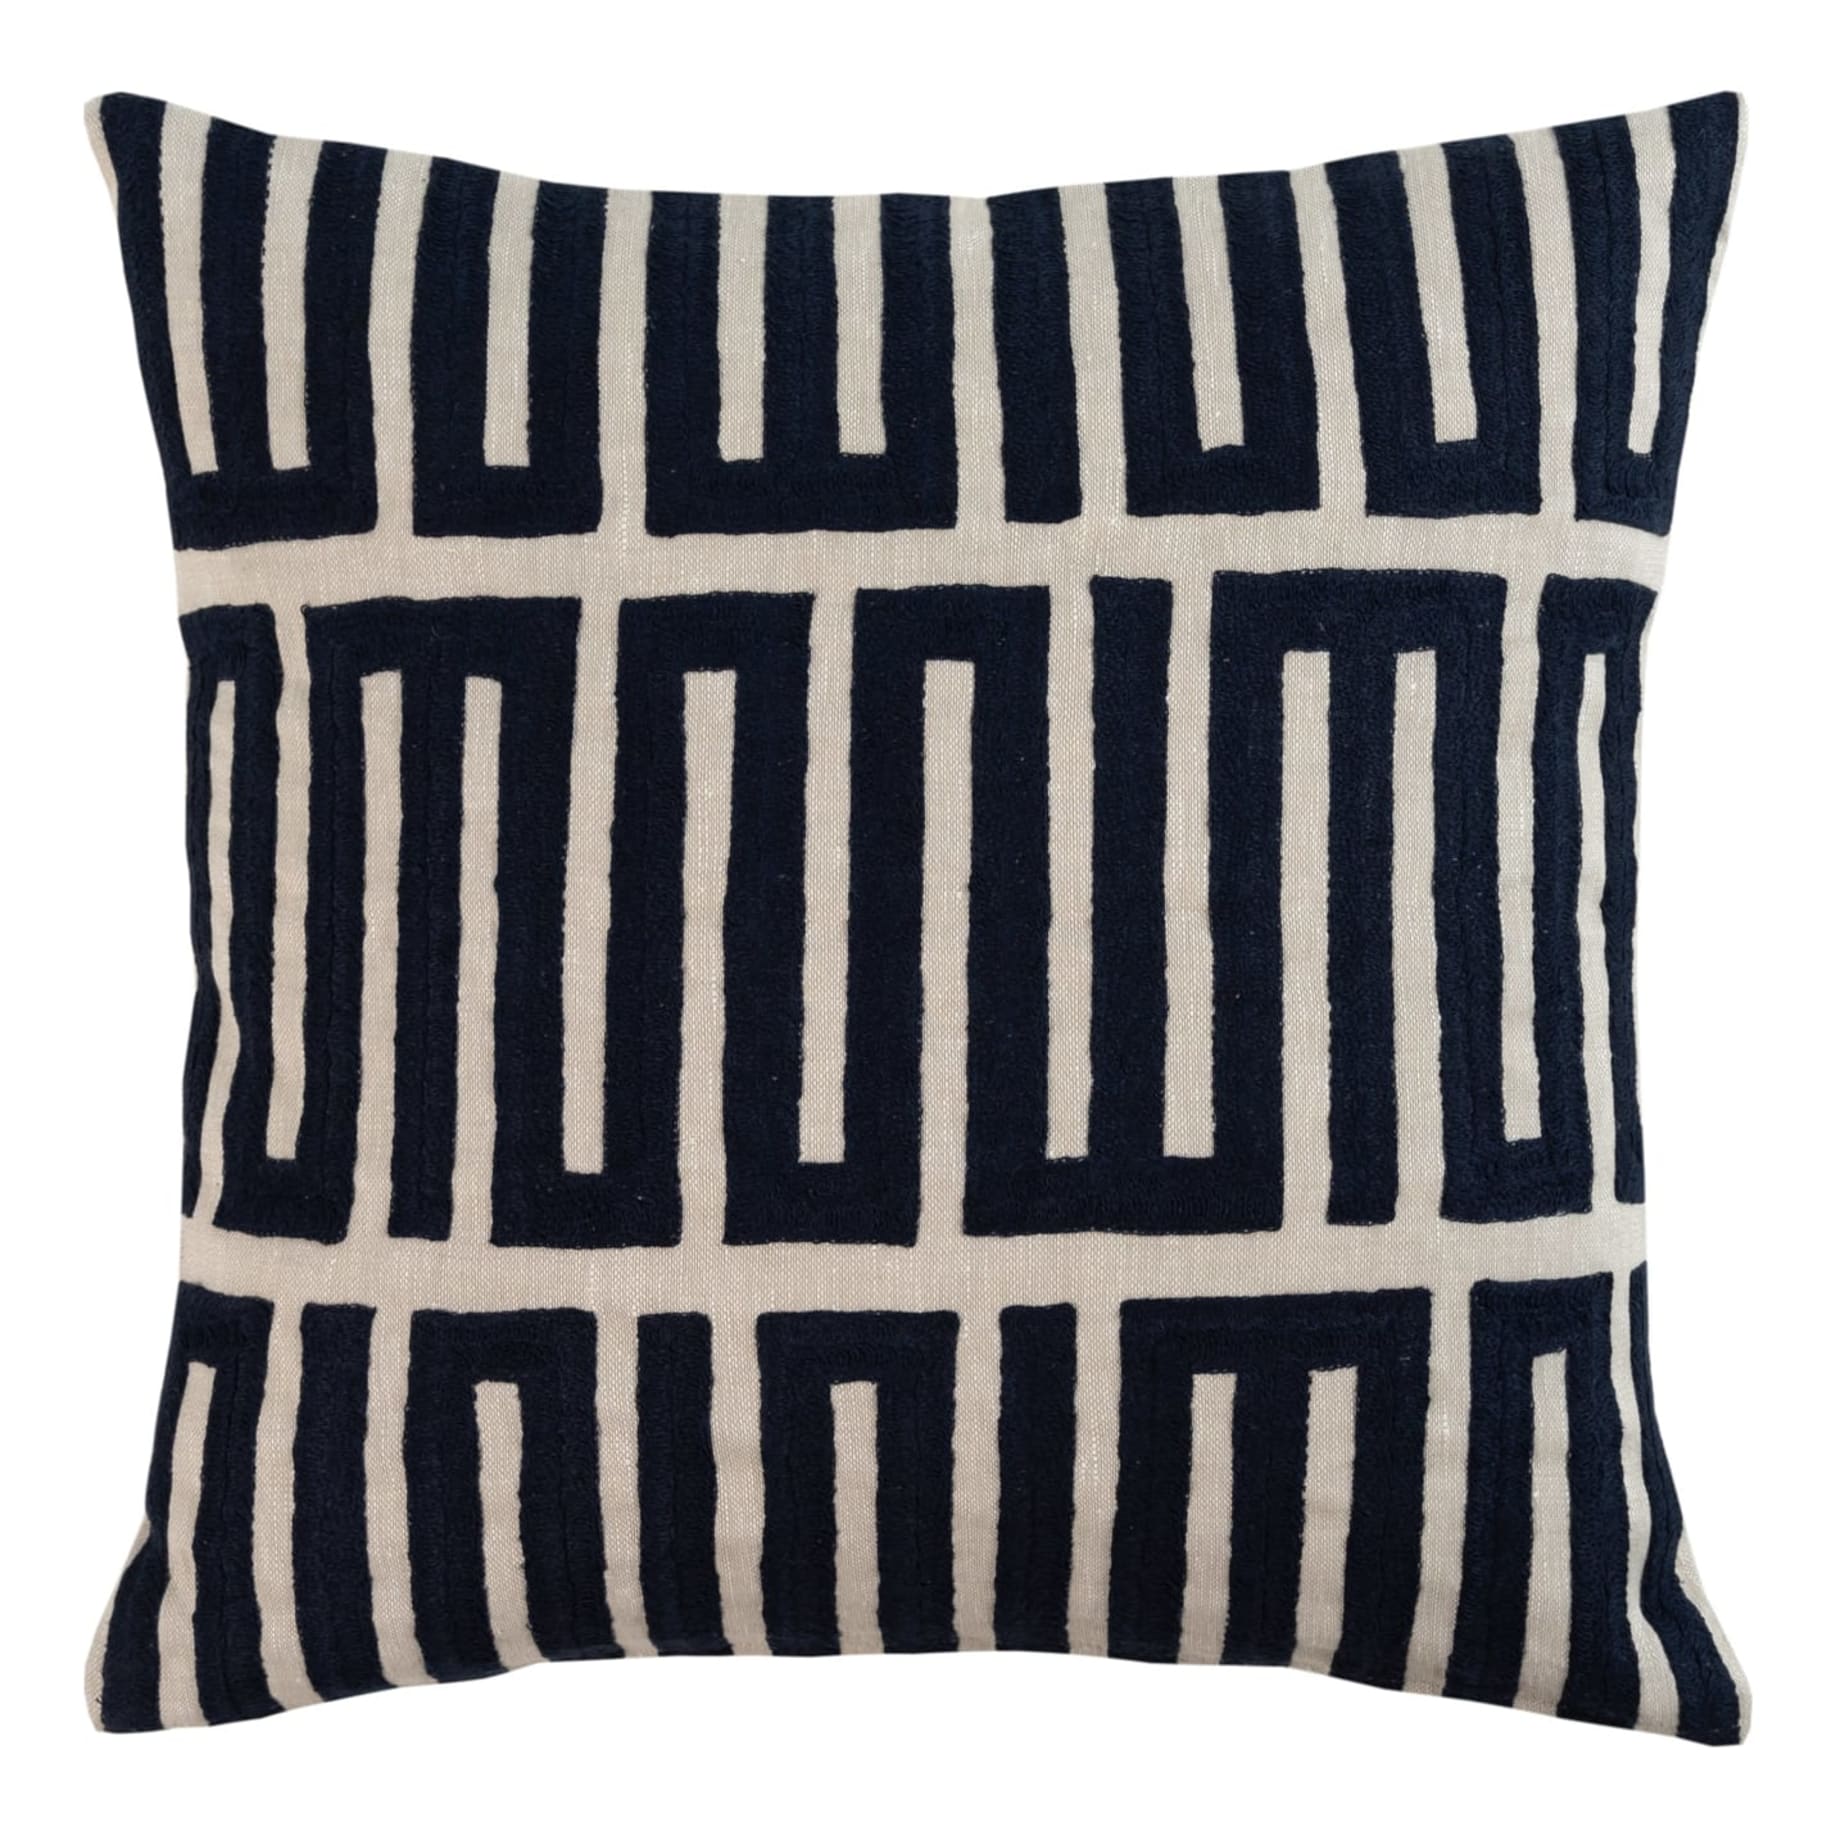 Claremont Feather Fill Cushion 50x50cm in Midnight